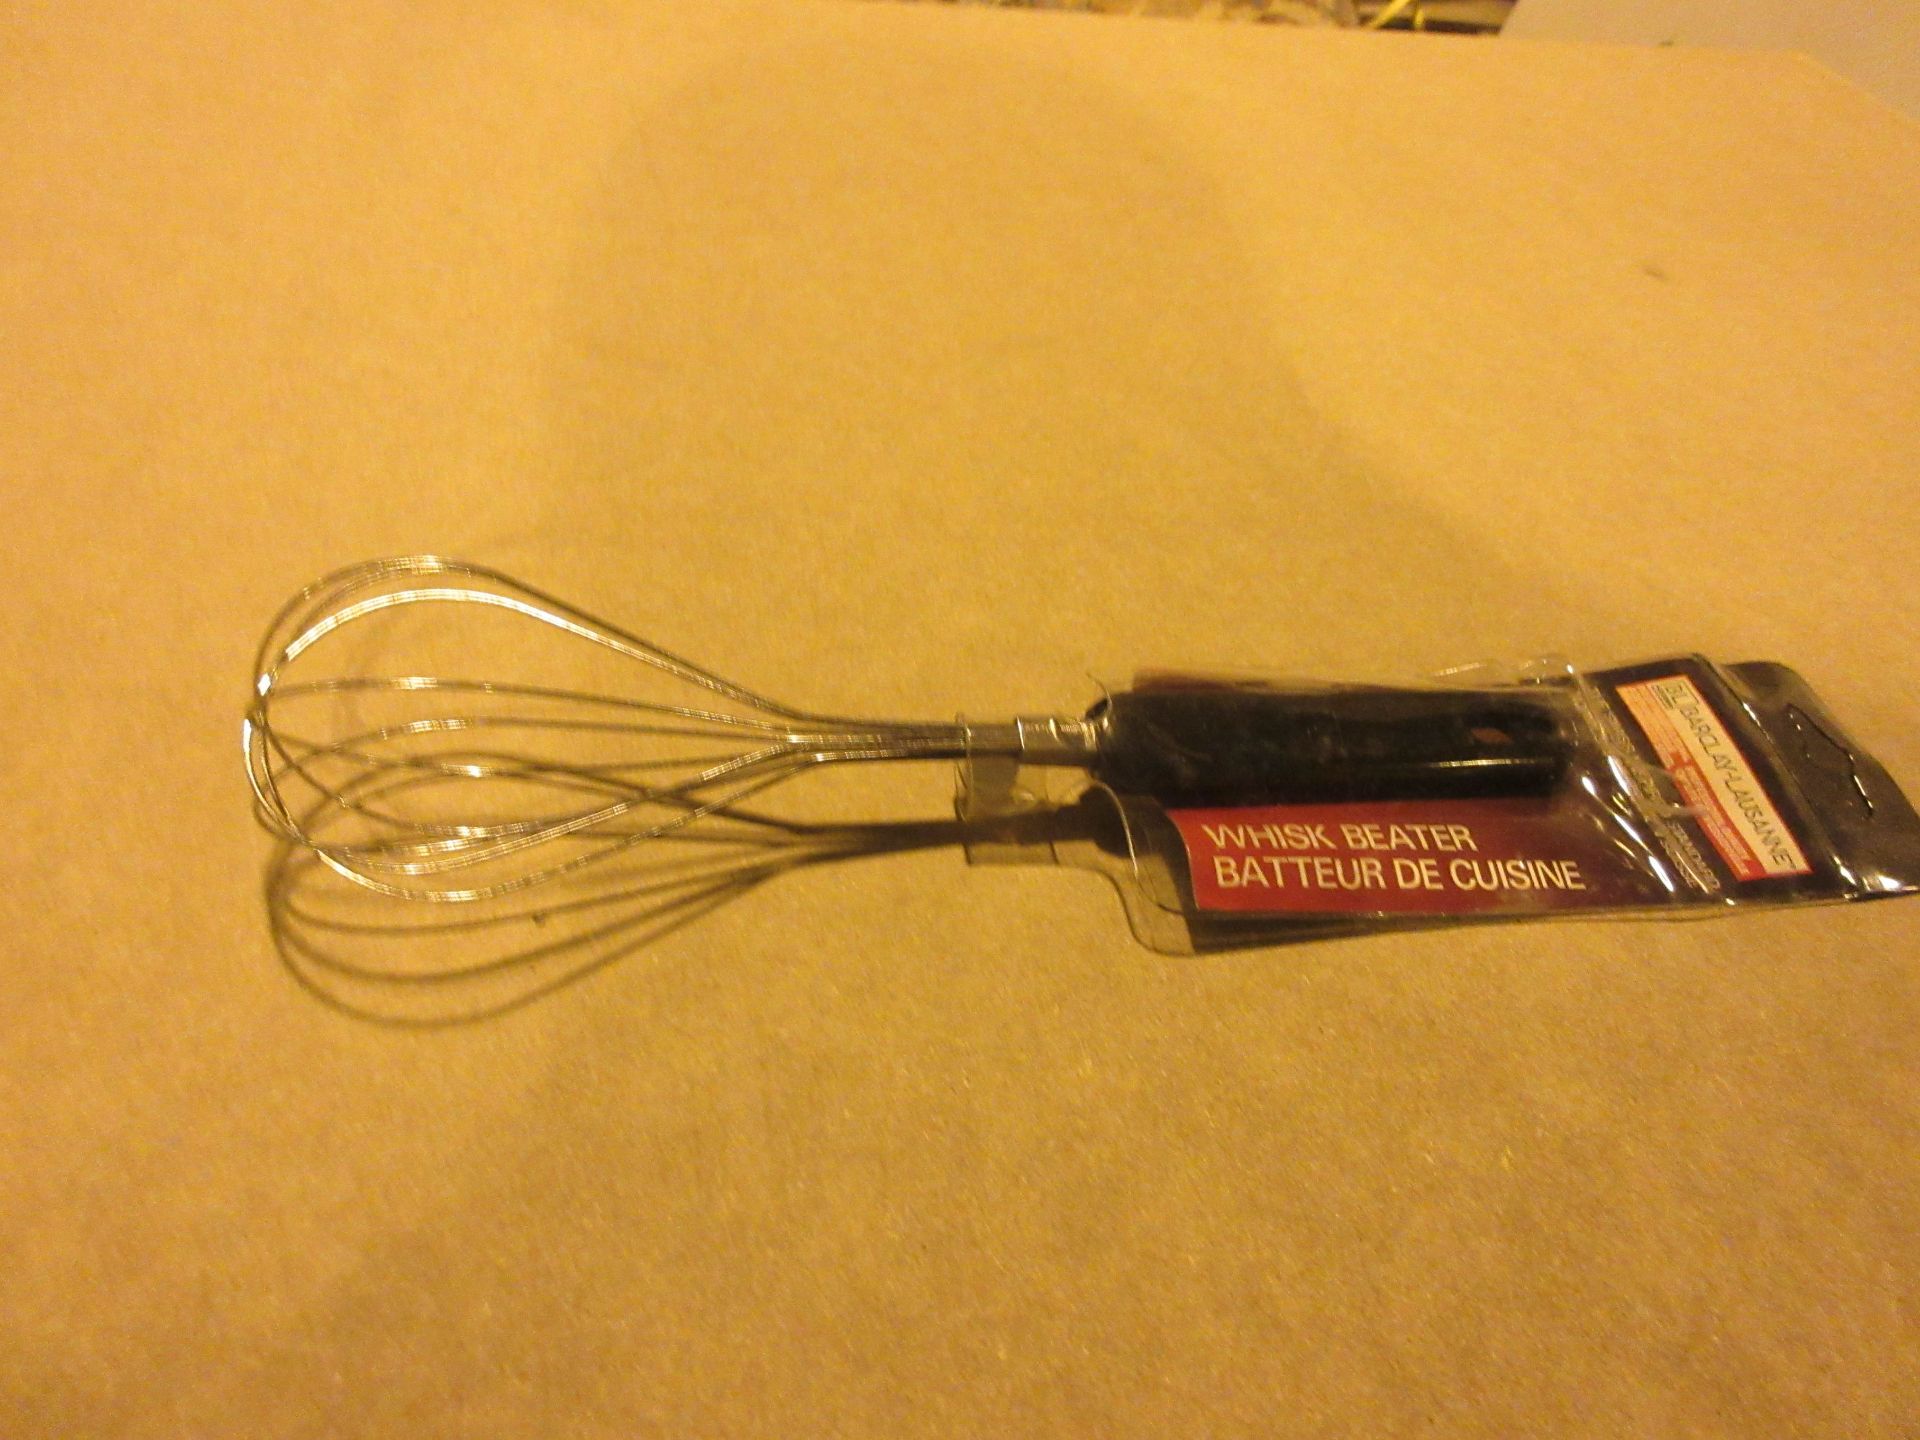 LOT 288 pieces -Whisk beater (2 boxes)